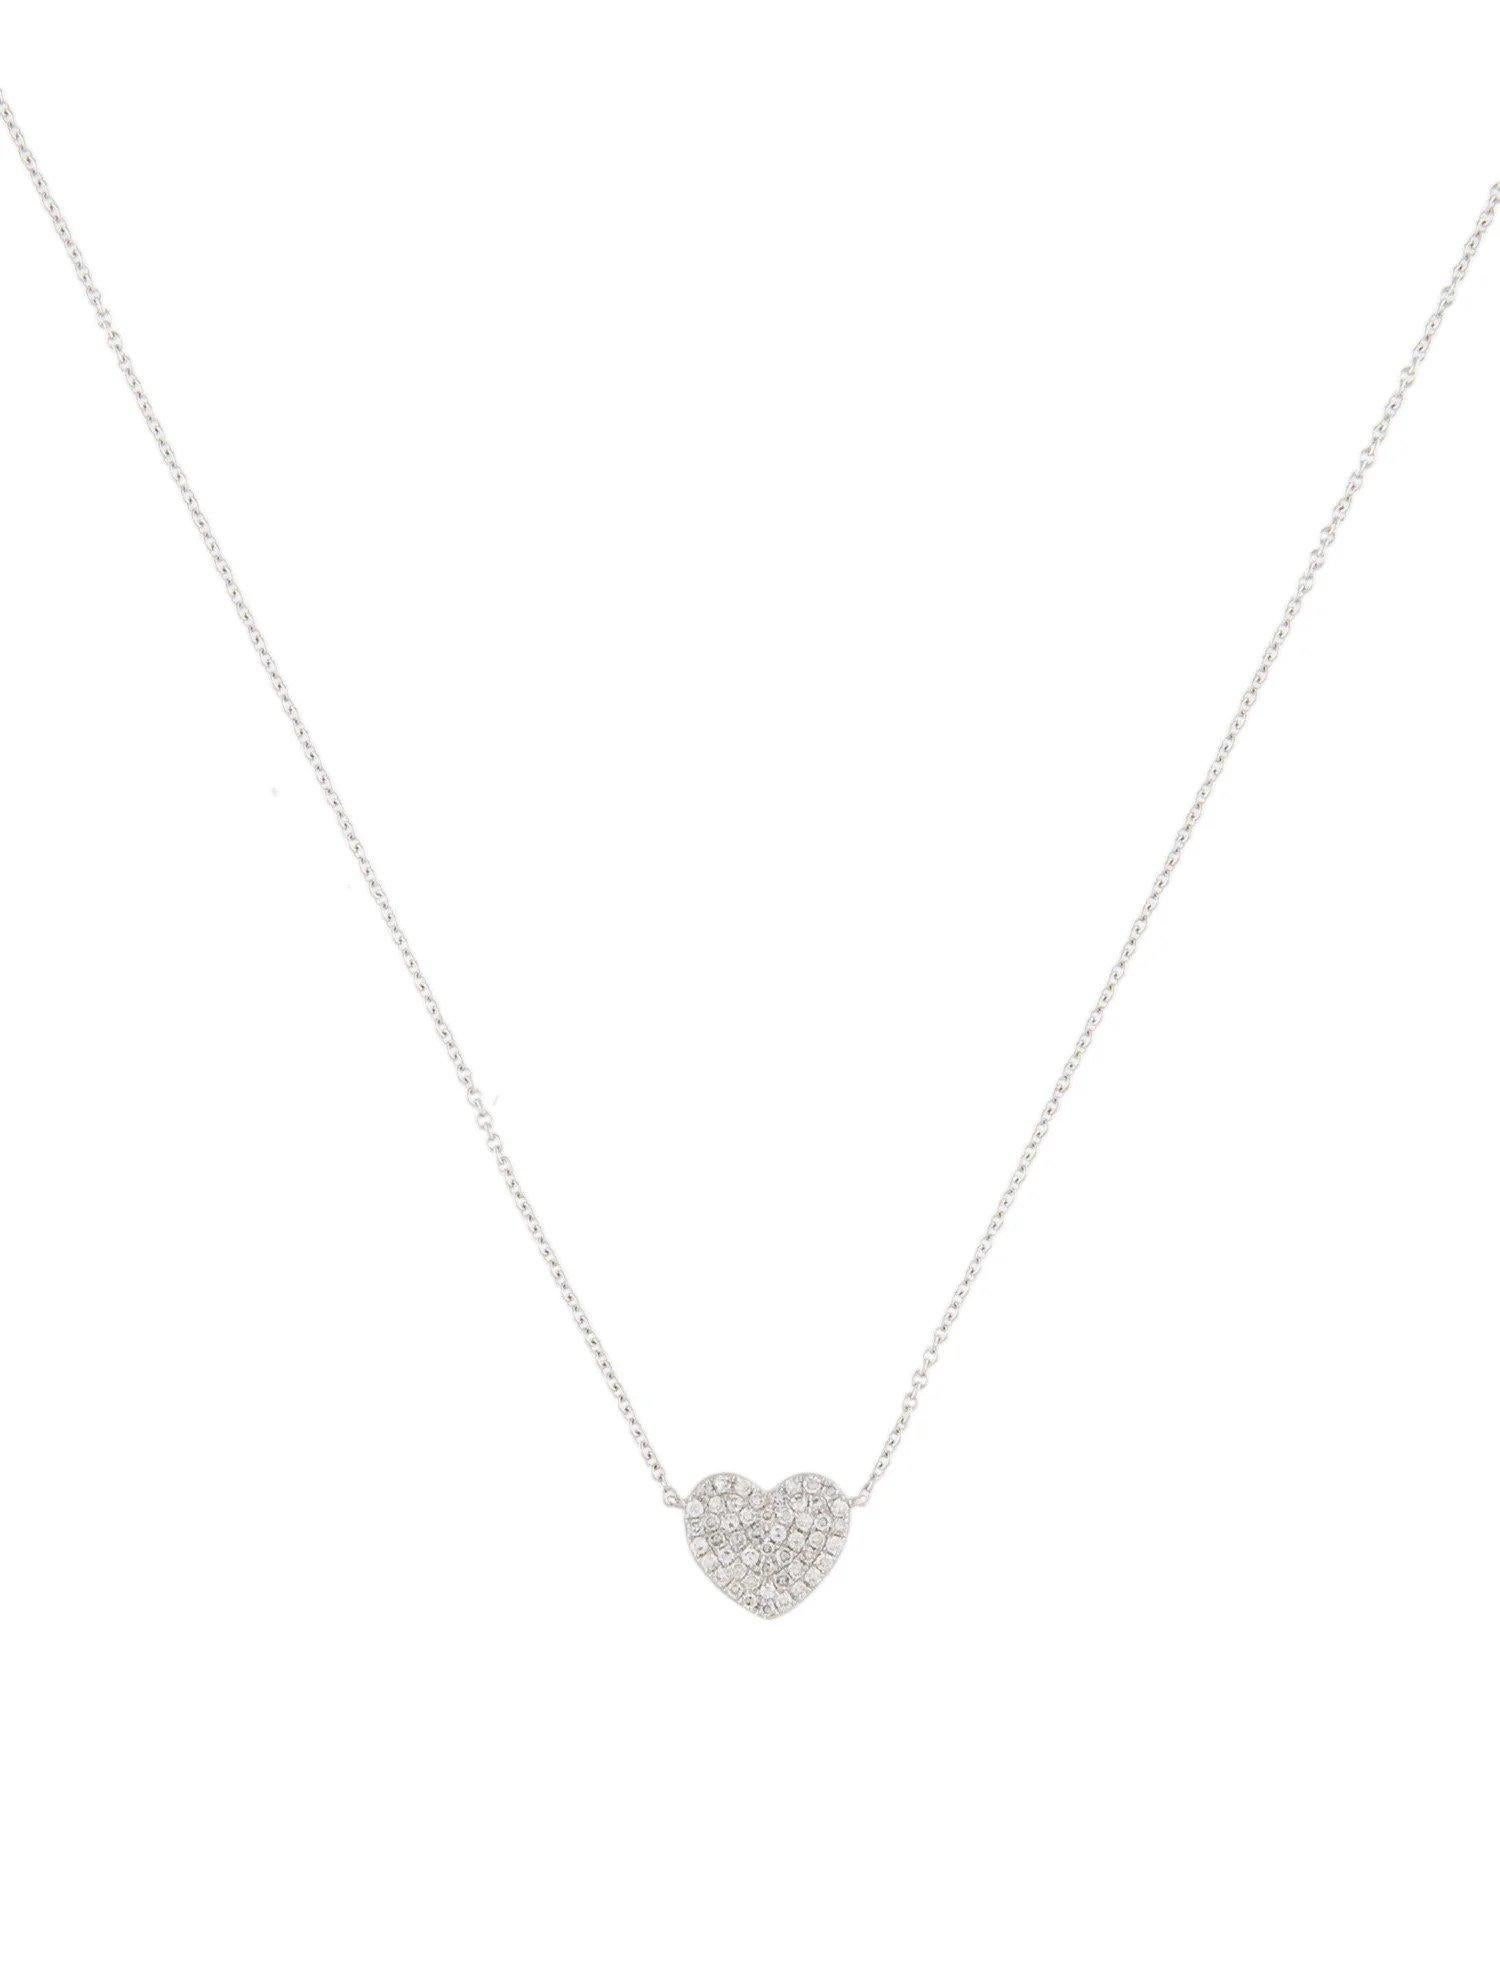 0.16 Carat Diamond Heart White Gold Pendant In New Condition For Sale In Great Neck, NY